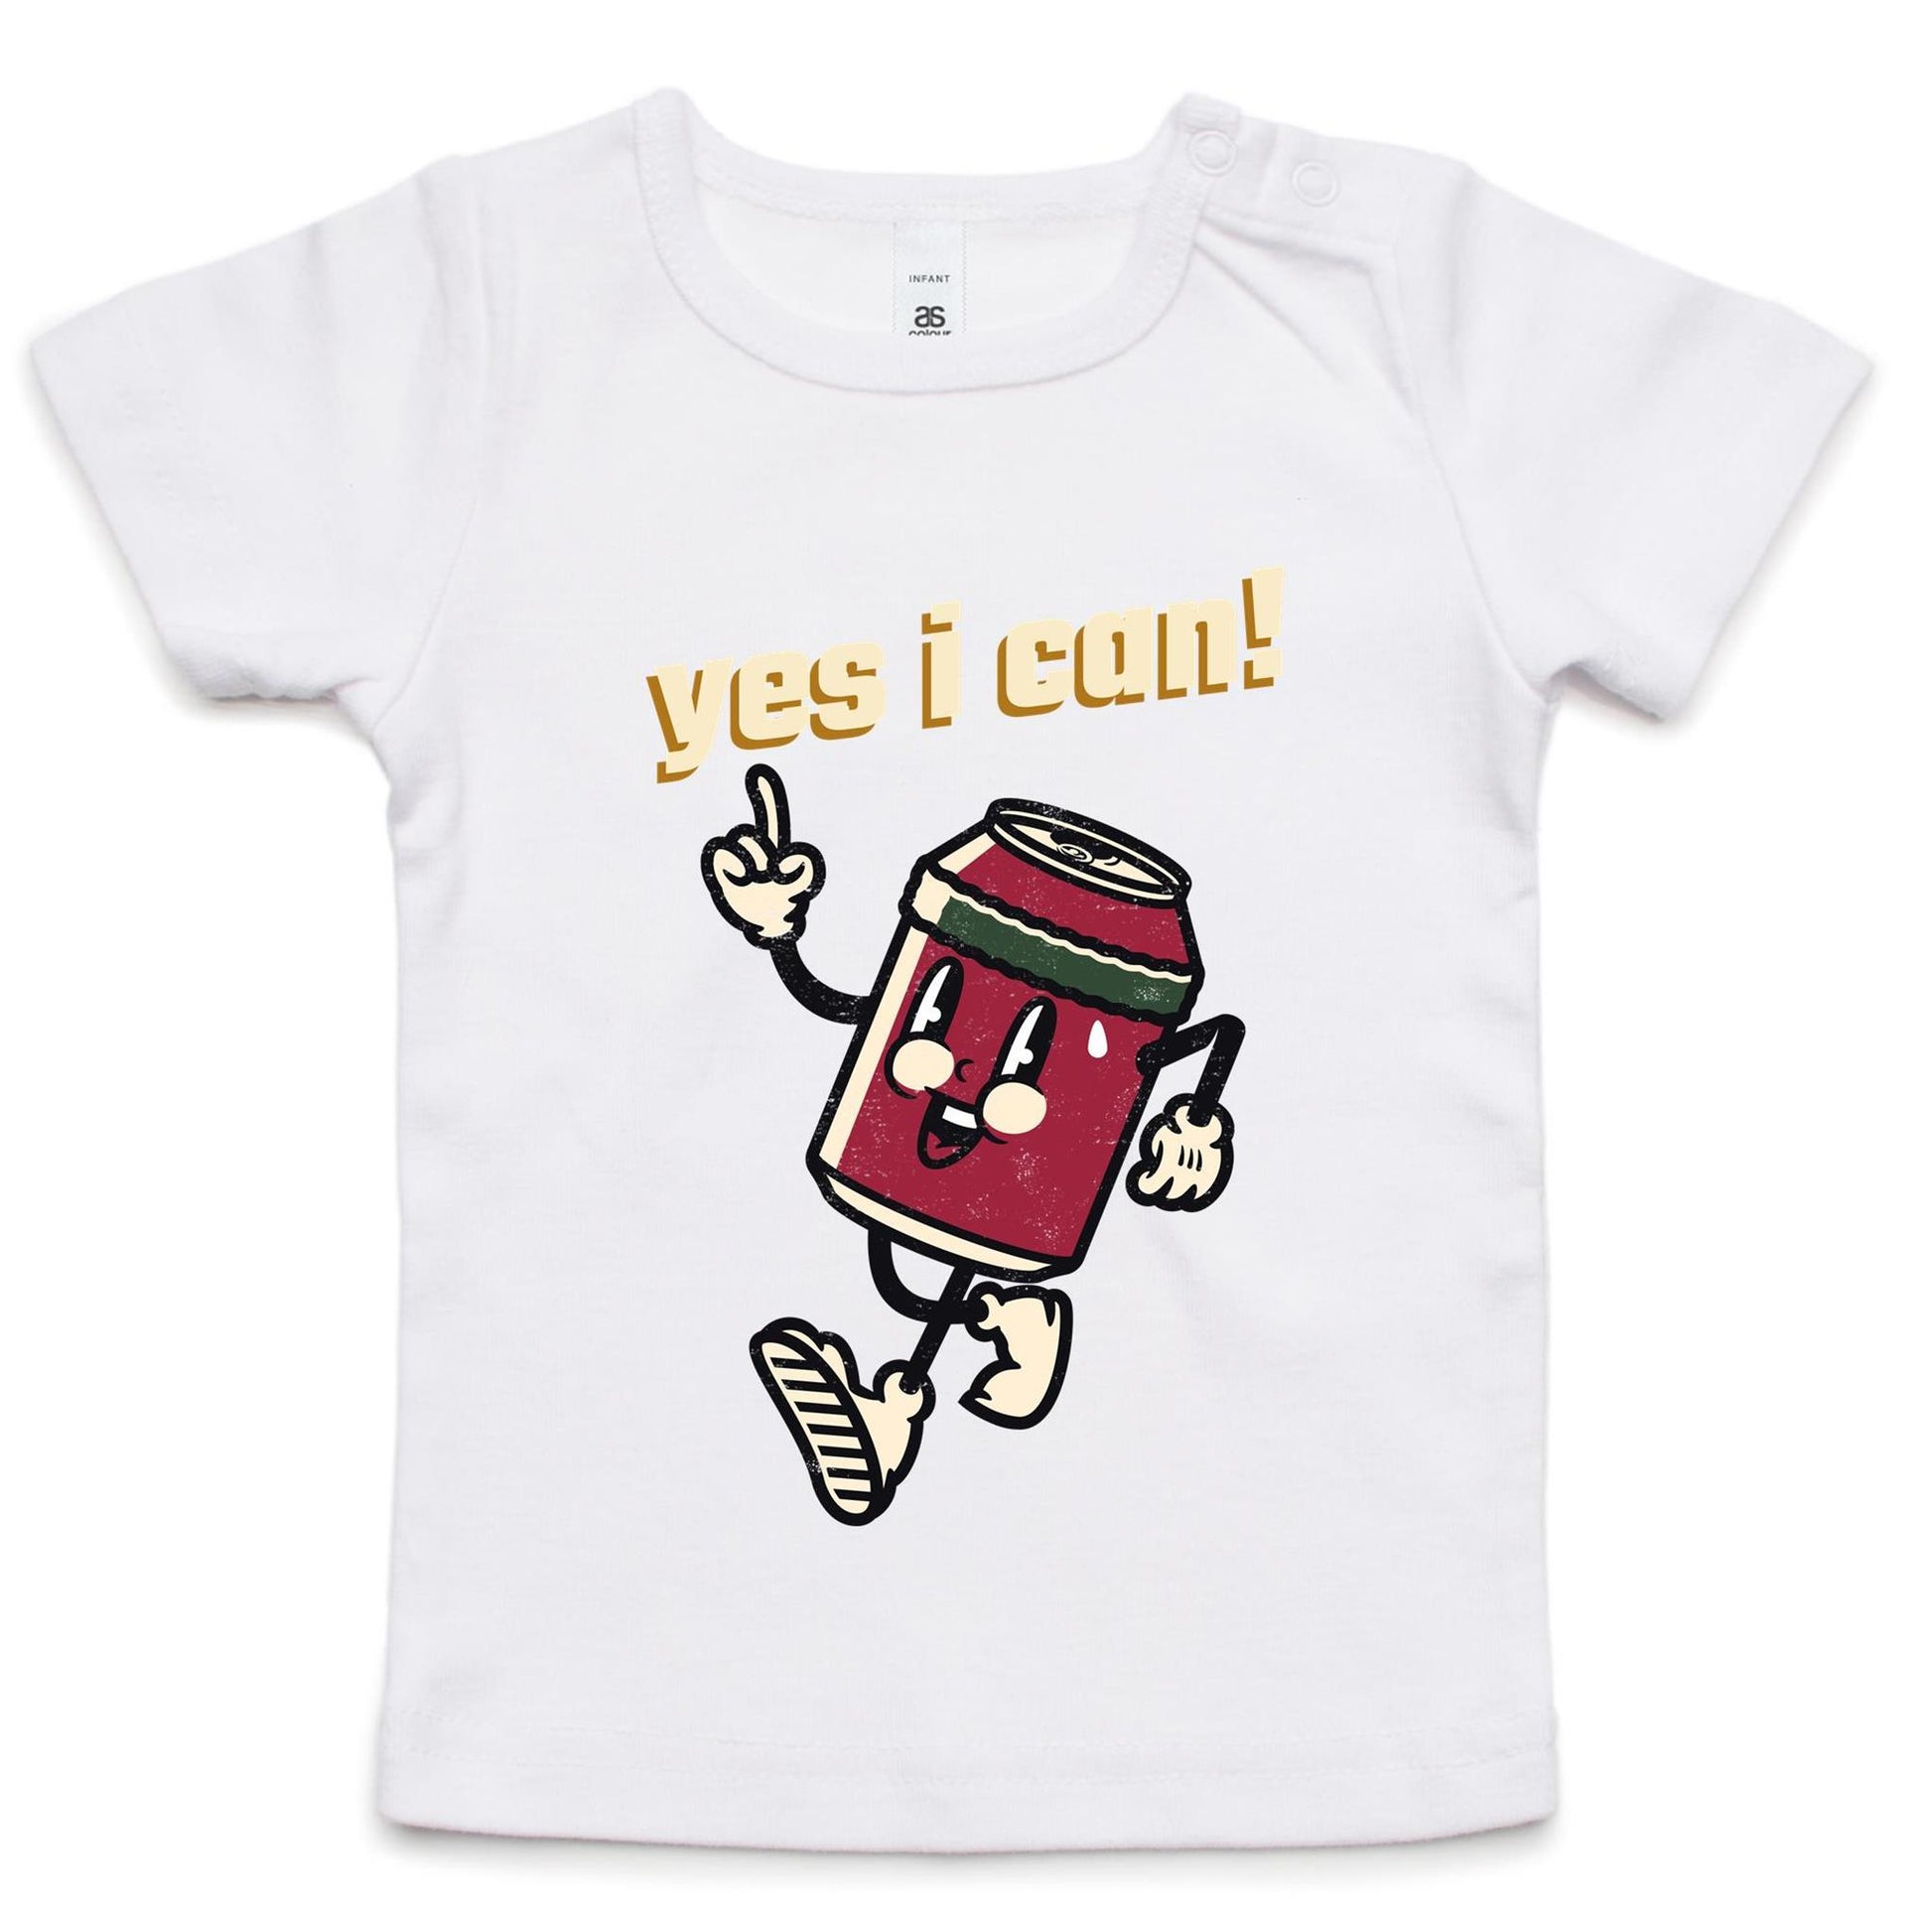 Yes I Can! - Baby T-shirt White Baby T-shirt Motivation Retro